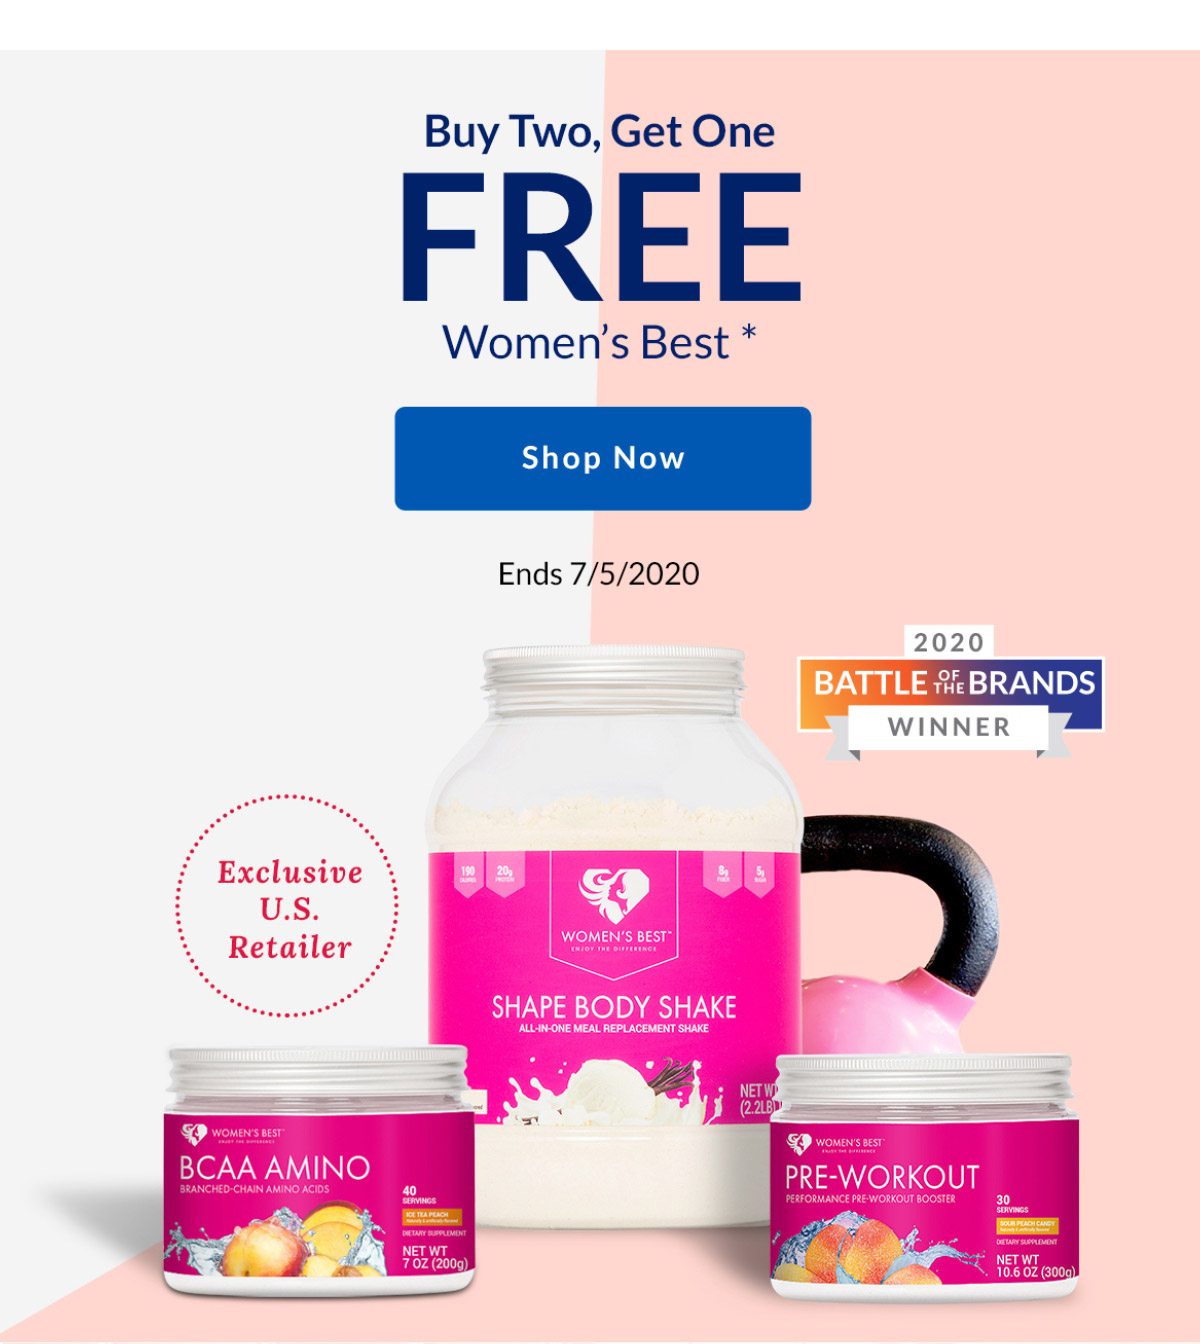 Buy Two, Get One FREE Women's Best - SHOP NOW